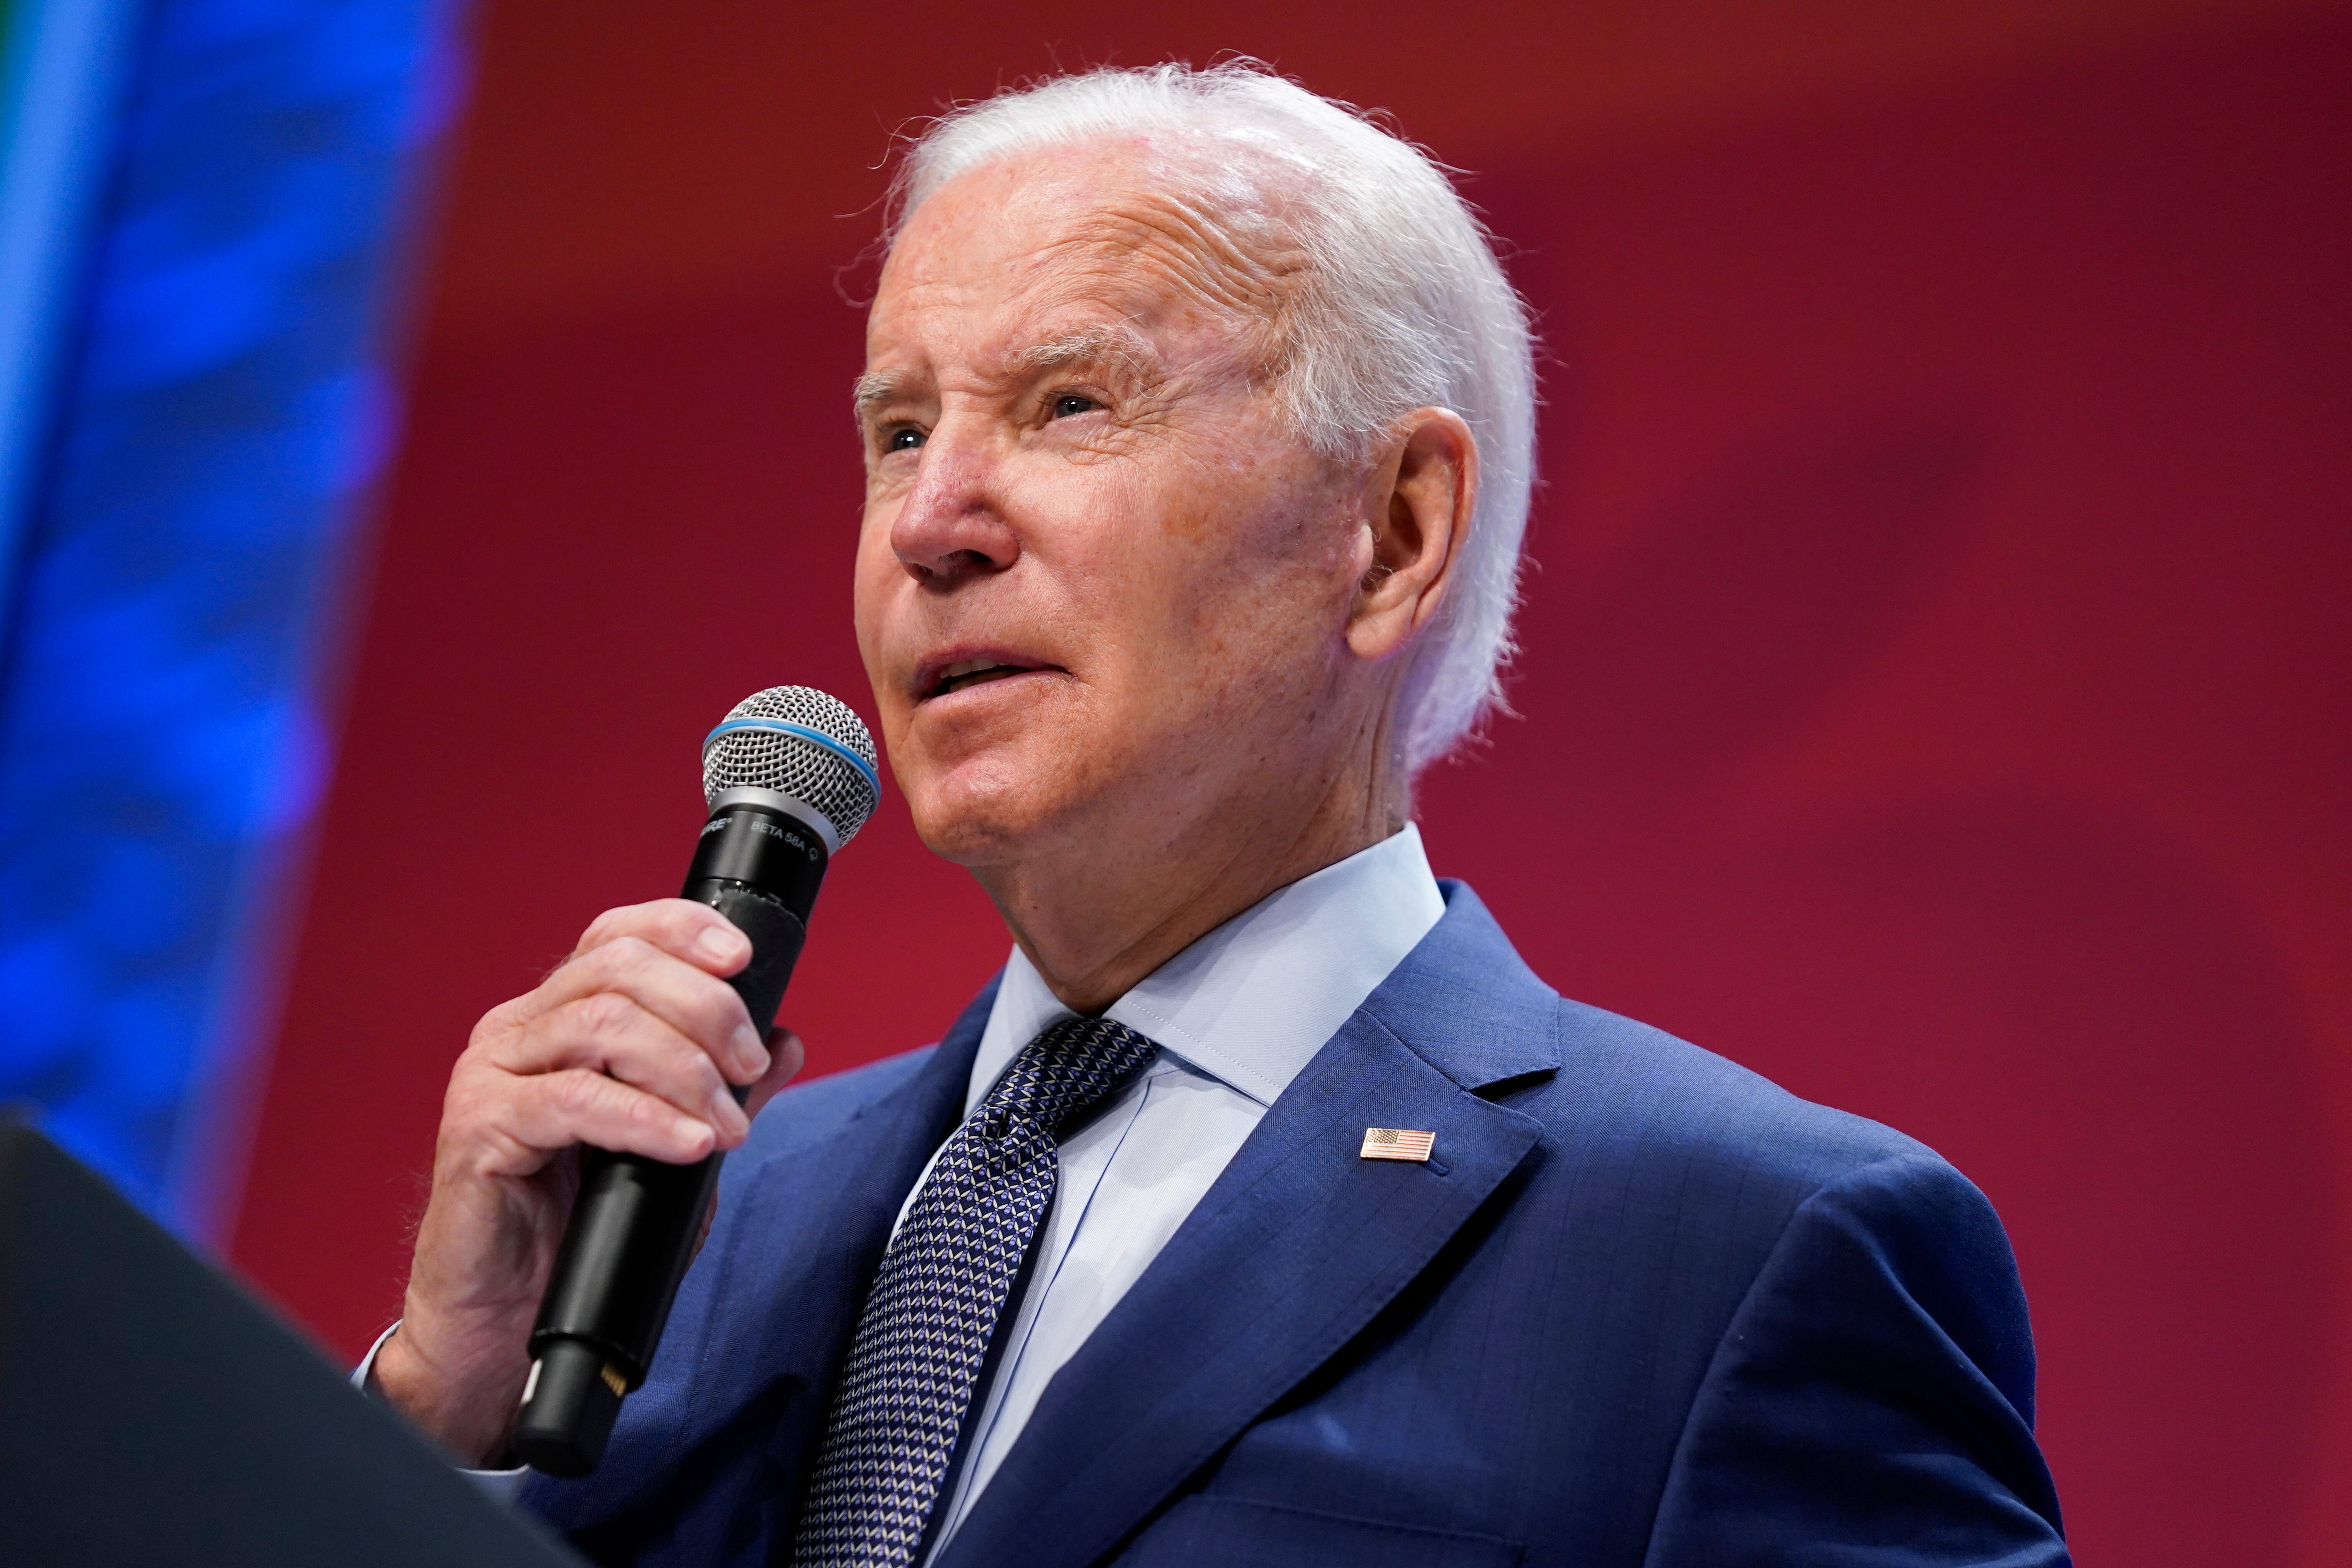 Biden proposes making South Carolina, not Iowa, first in presidential selection process